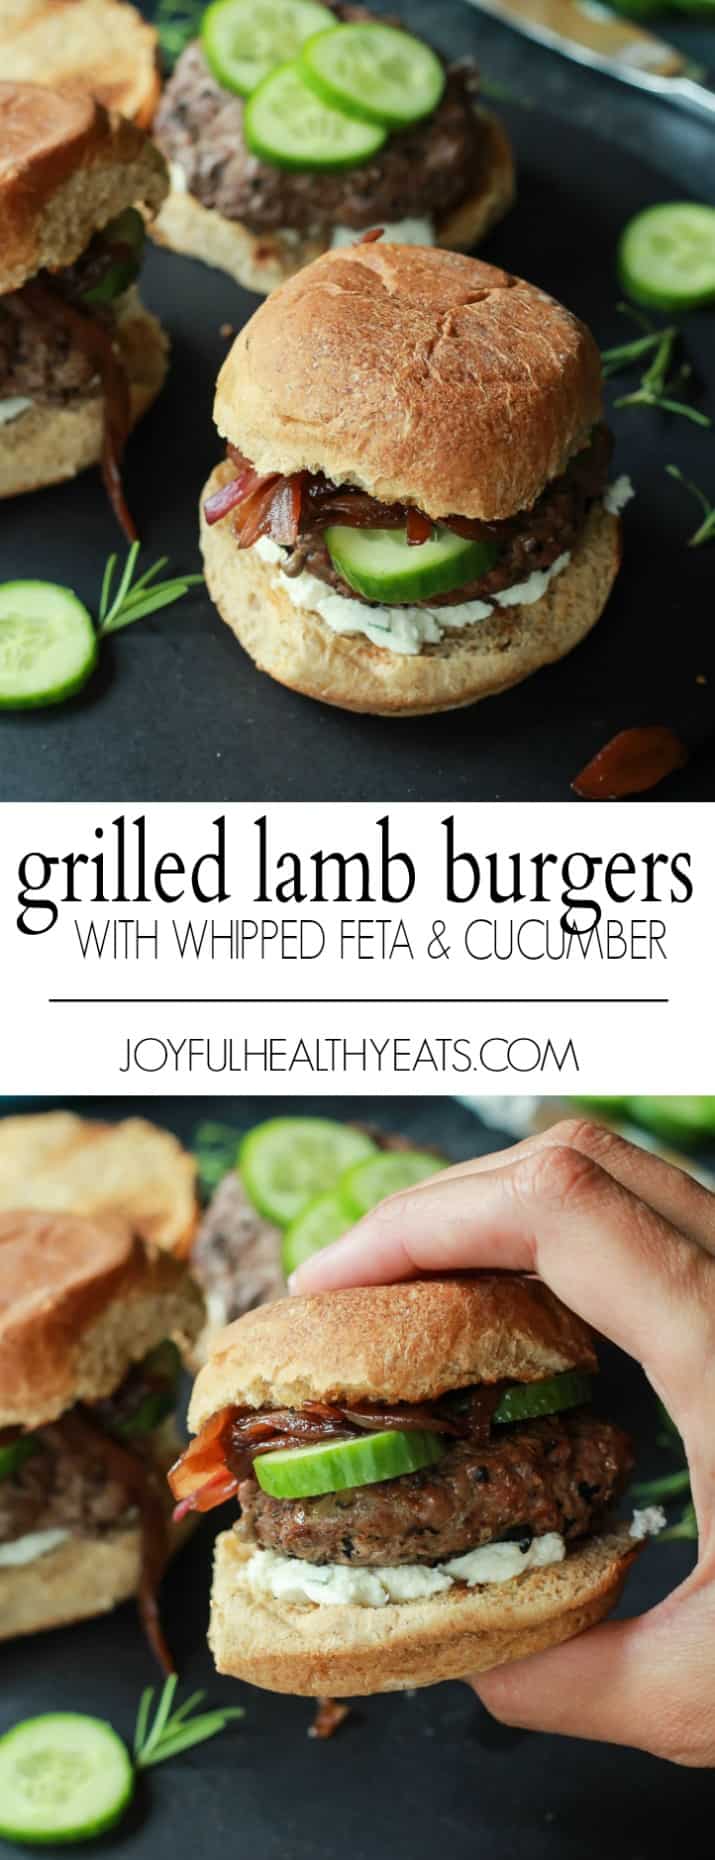 Recipe collage for Grilled Lamb Burgers with Whipped Feta and Cucumber